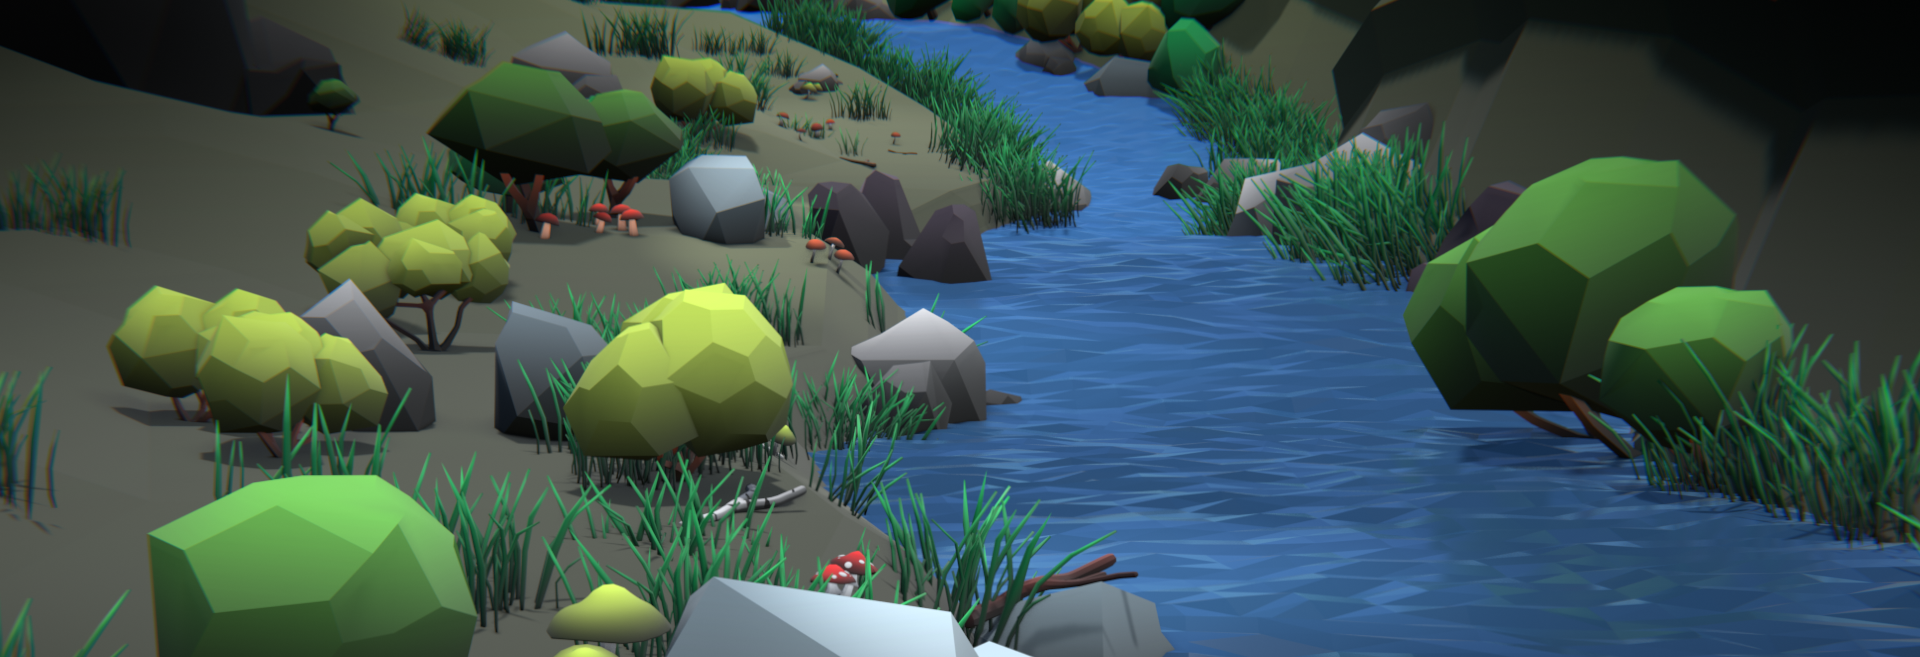 Forest Ground Essentials: Low Poly Bushes, Branches & More